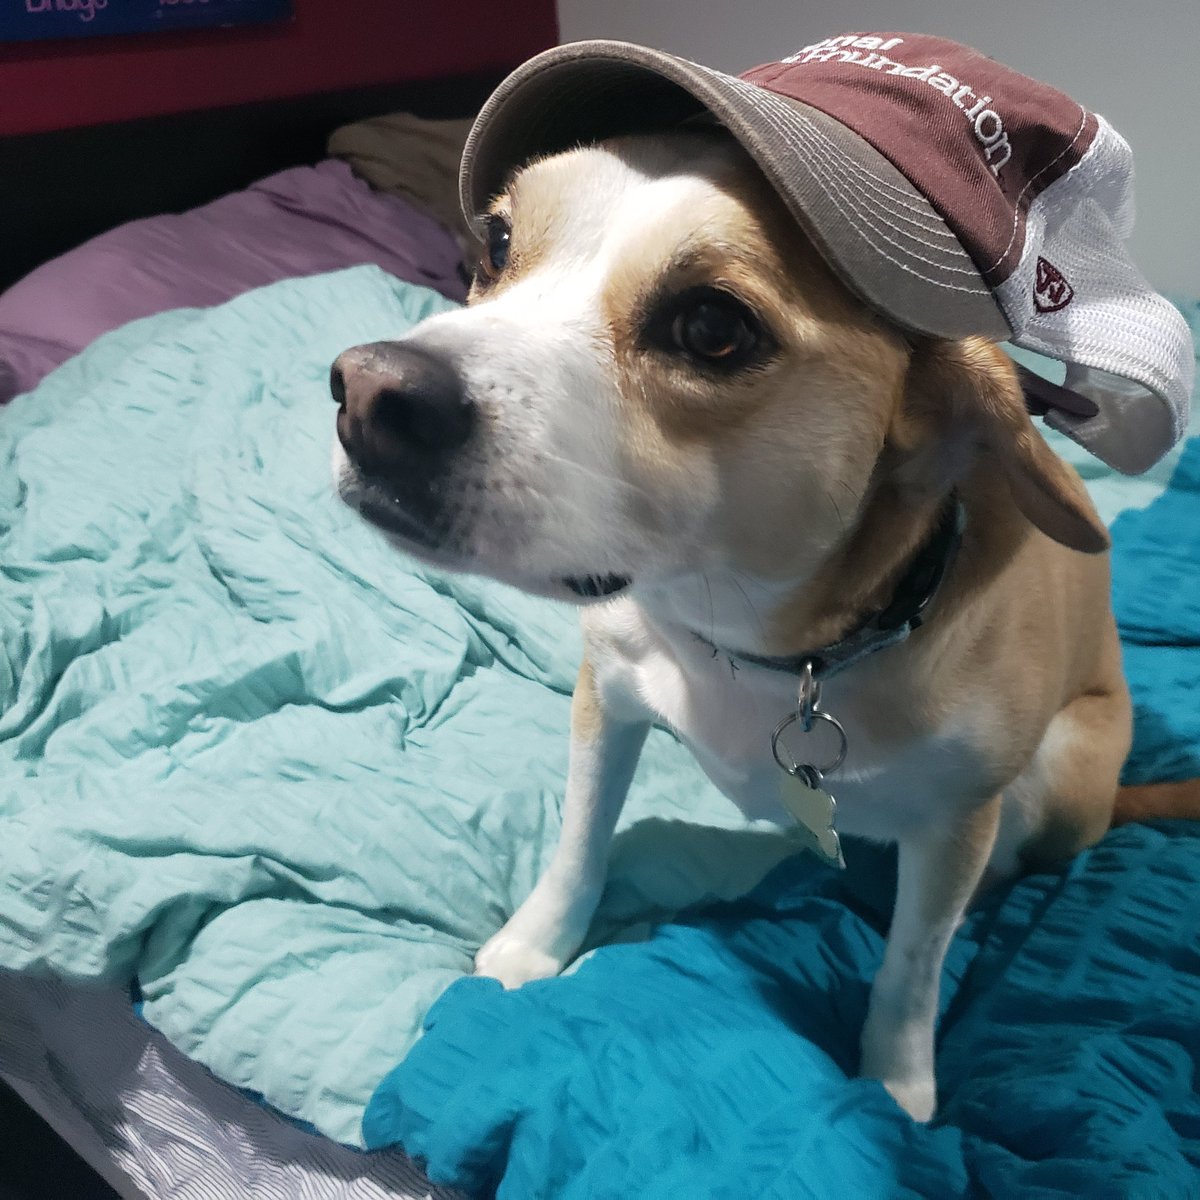 Pickle isn’t thrilled to be wearing this Find Your Park hat, but wants you to know that you can do it! If Pickle can wear this hat, you can get through this day! #FindYourPark  #EncuentraTuParque